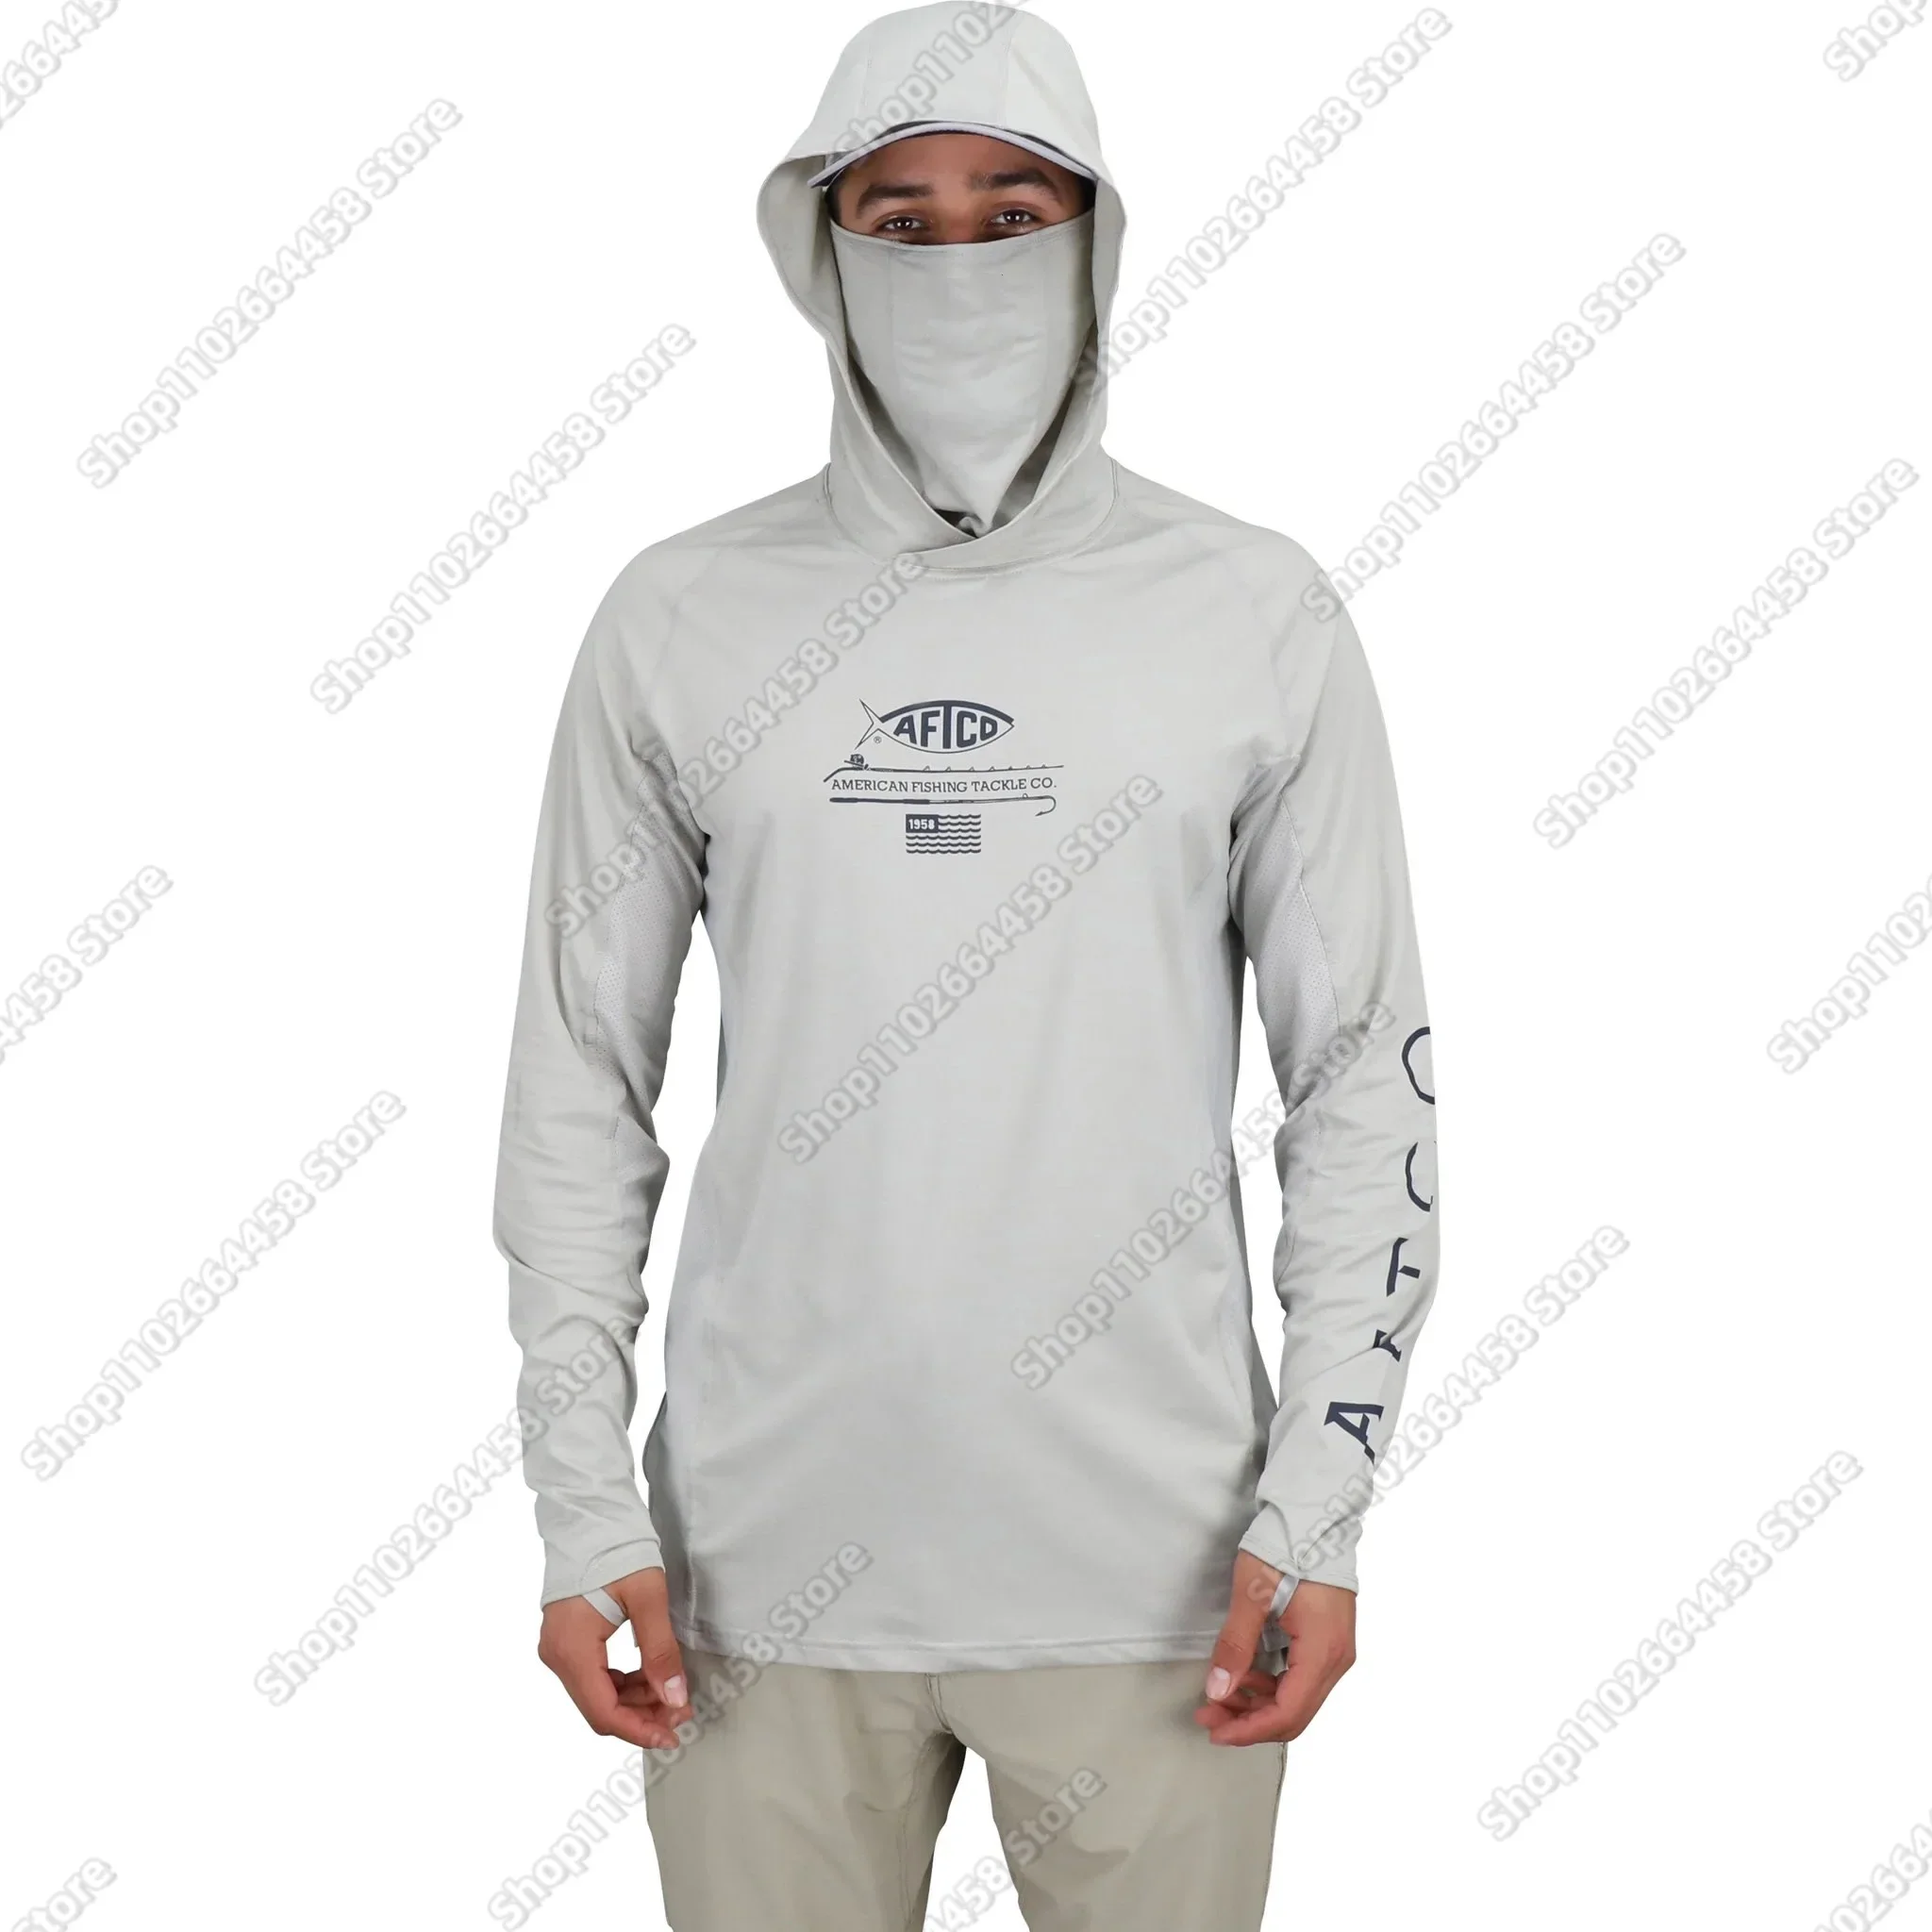 AFTCO Fishing Shirts Upf 50 Long Sleeve Hooded Face Cover Camisa